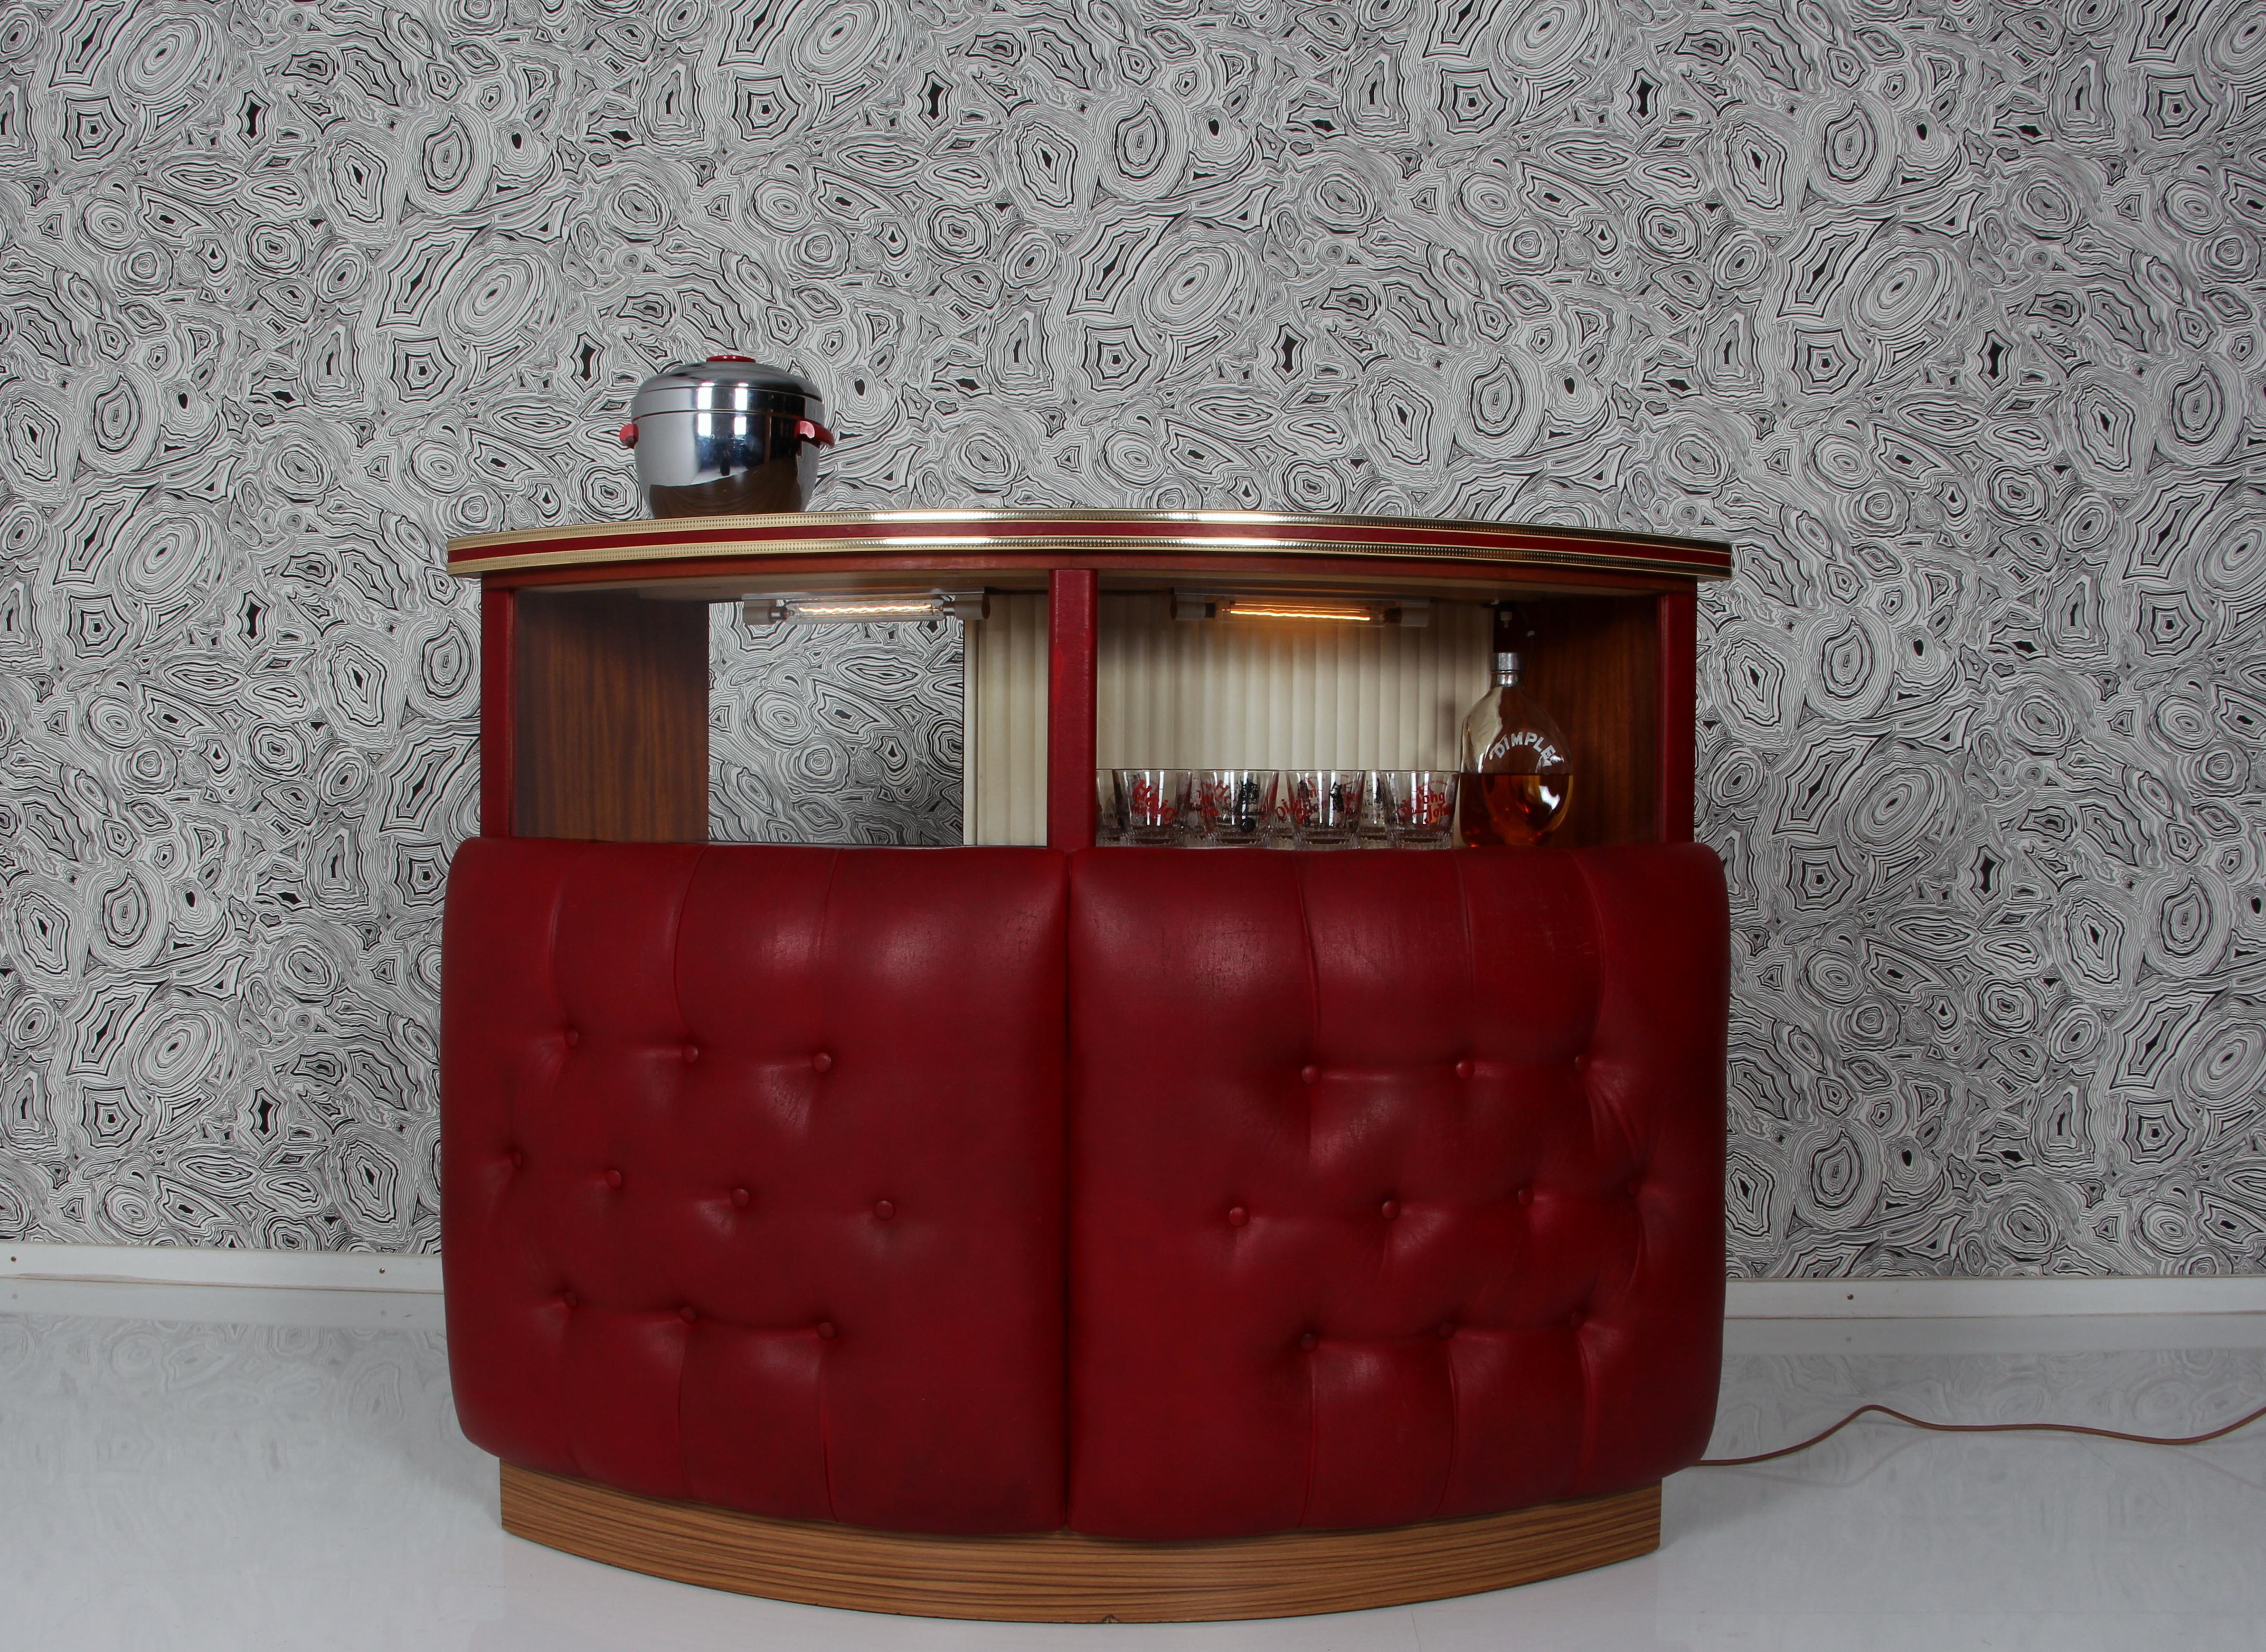 Midcentury Cocktail Bar Drinks Bar Counter Made in England a. Umberto Mascagni  3